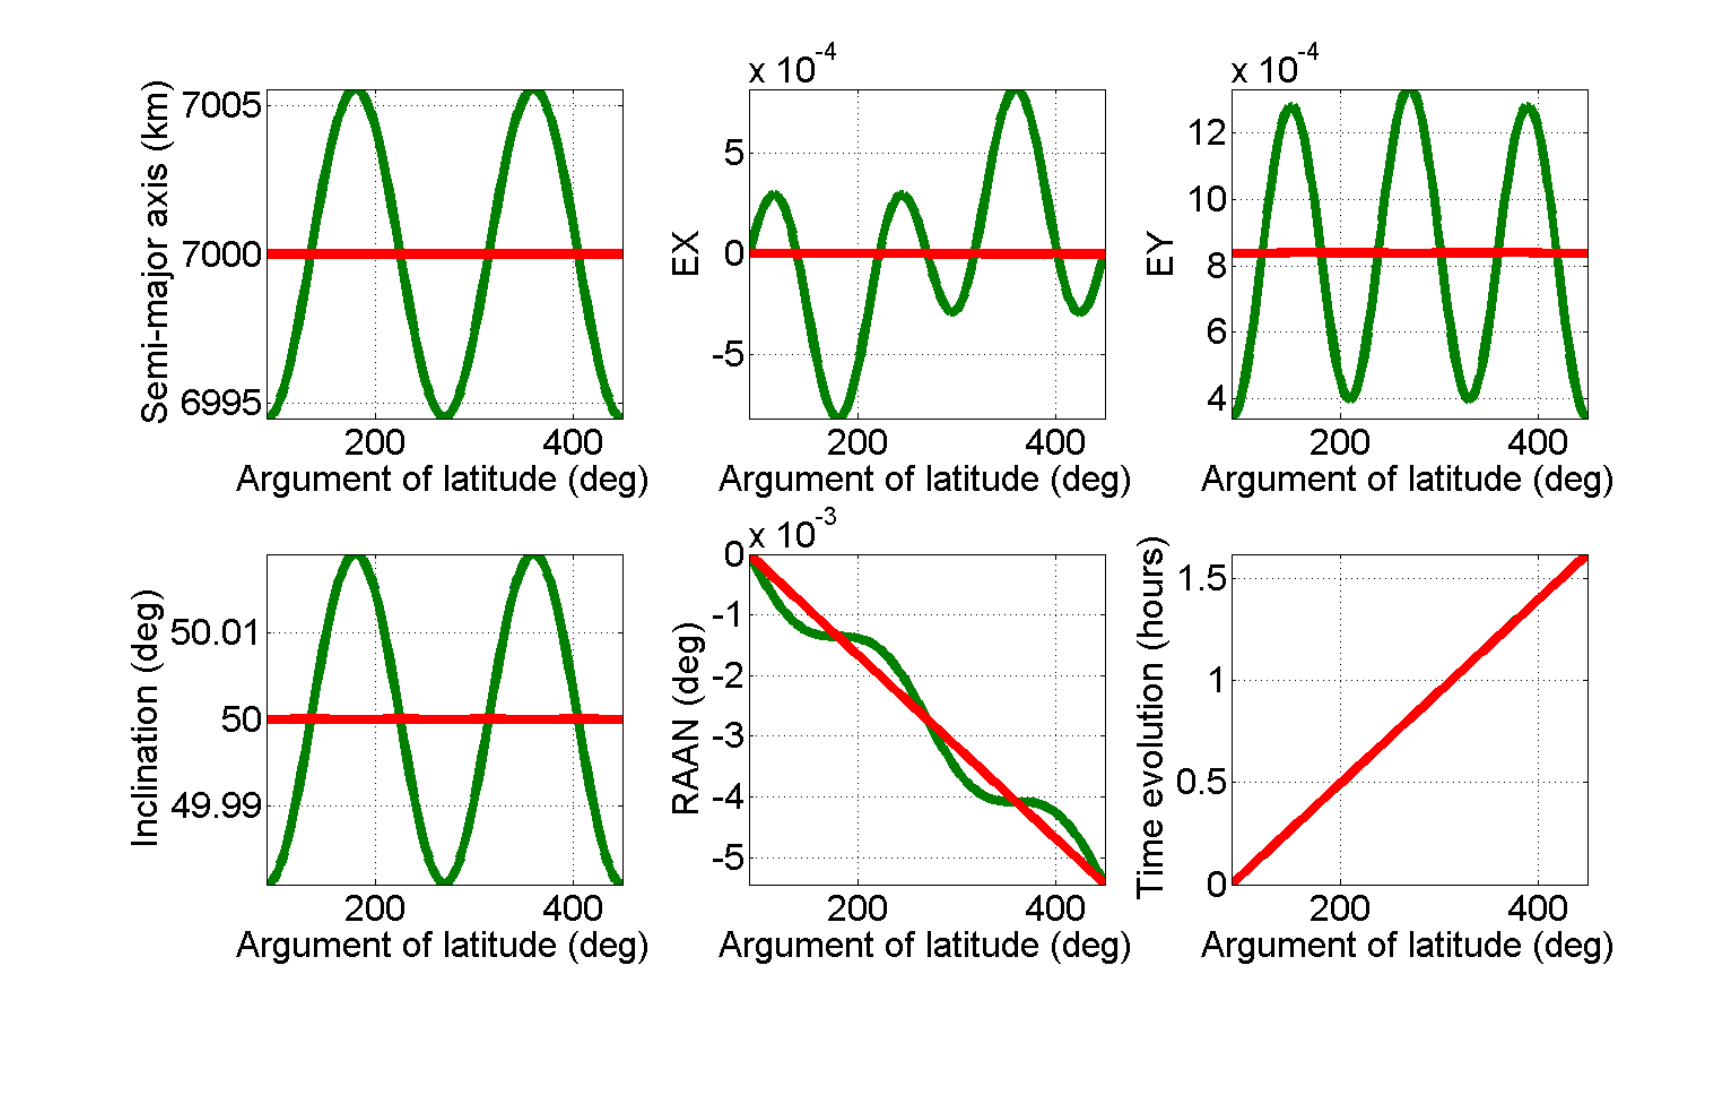 Analytic Frozen Orbits Under The Zonal Harmonics Perturbation From An Earth-like Planet